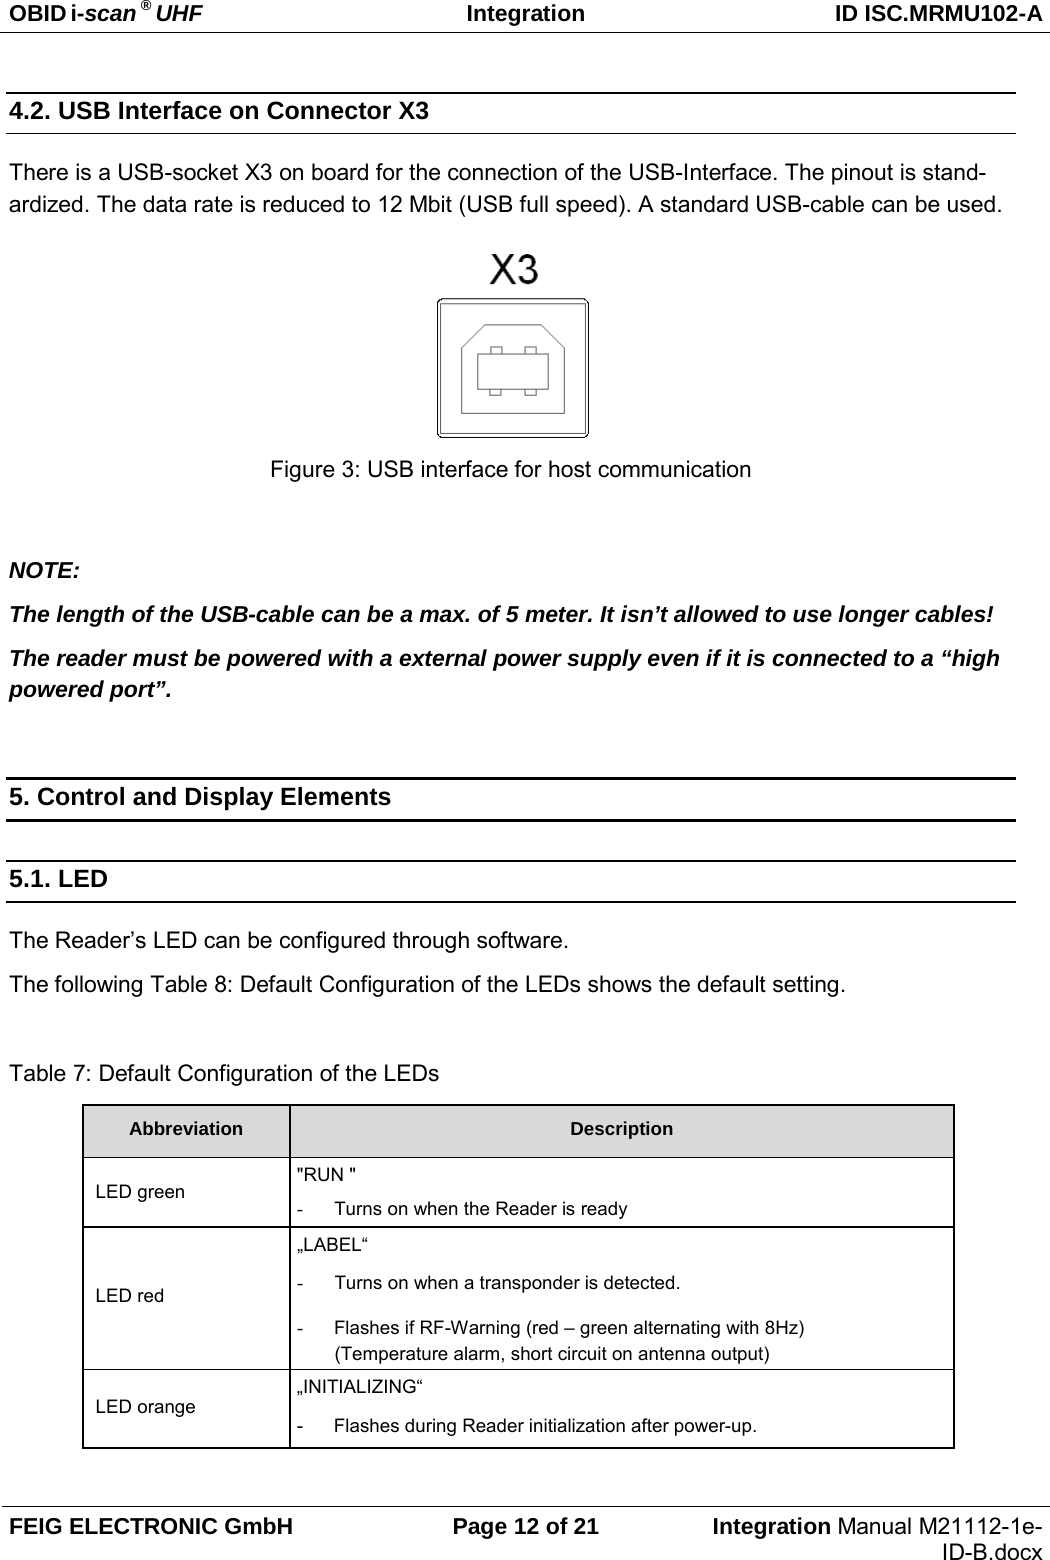 OBID i-scan ® UHF Integration ID ISC.MRMU102-A  FEIG ELECTRONIC GmbH Page 12 of 21 Integration Manual M21112-1e-ID-B.docx  4.2. USB Interface on Connector X3 There is a USB-socket X3 on board for the connection of the USB-Interface. The pinout is stand-ardized. The data rate is reduced to 12 Mbit (USB full speed). A standard USB-cable can be used.      Figure 3: USB interface for host communication  NOTE:  The length of the USB-cable can be a max. of 5 meter. It isn’t allowed to use longer cables! The reader must be powered with a external power supply even if it is connected to a “high powered port”.  5. Control and Display Elements 5.1. LED The Reader’s LED can be configured through software. The following Table 8: Default Configuration of the LEDs shows the default setting.  Table 7: Default Configuration of the LEDs Abbreviation Description  LED green &quot;RUN &quot; - Turns on when the Reader is ready  LED red „LABEL“ - Turns on when a transponder is detected. - Flashes if RF-Warning (red – green alternating with 8Hz) (Temperature alarm, short circuit on antenna output)  LED orange „INITIALIZING“ -   Flashes during Reader initialization after power-up.  